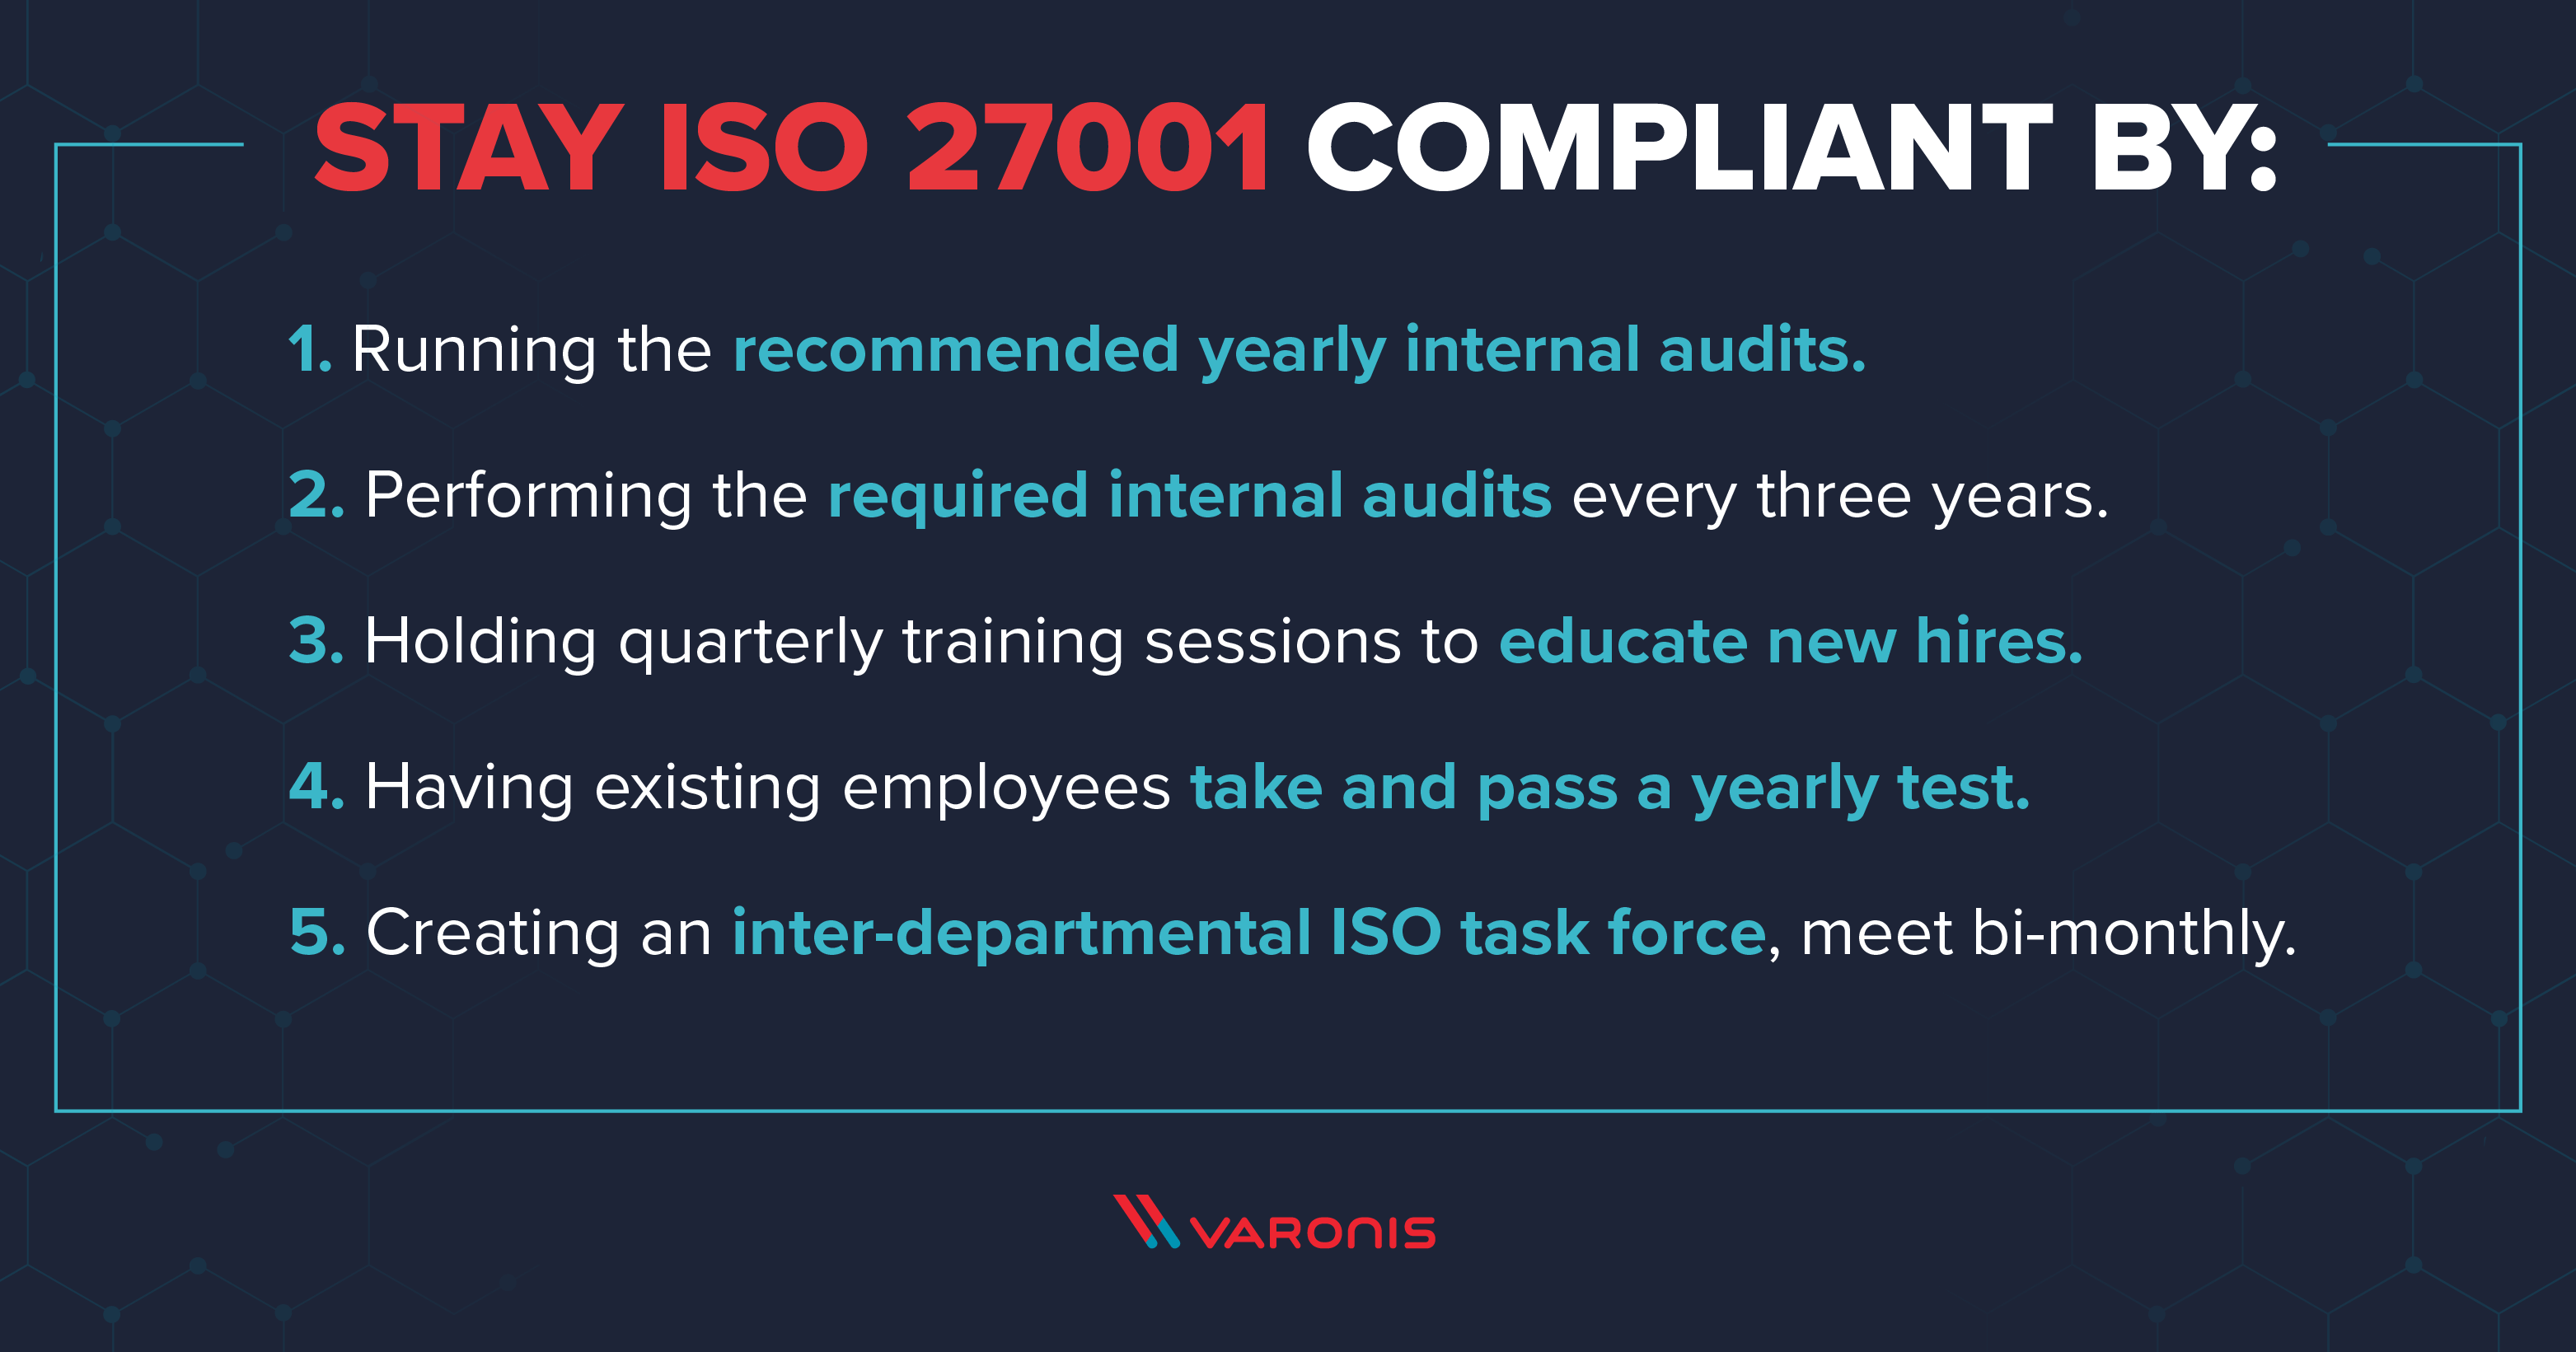 image of how to maintain ISO 27001 compliance